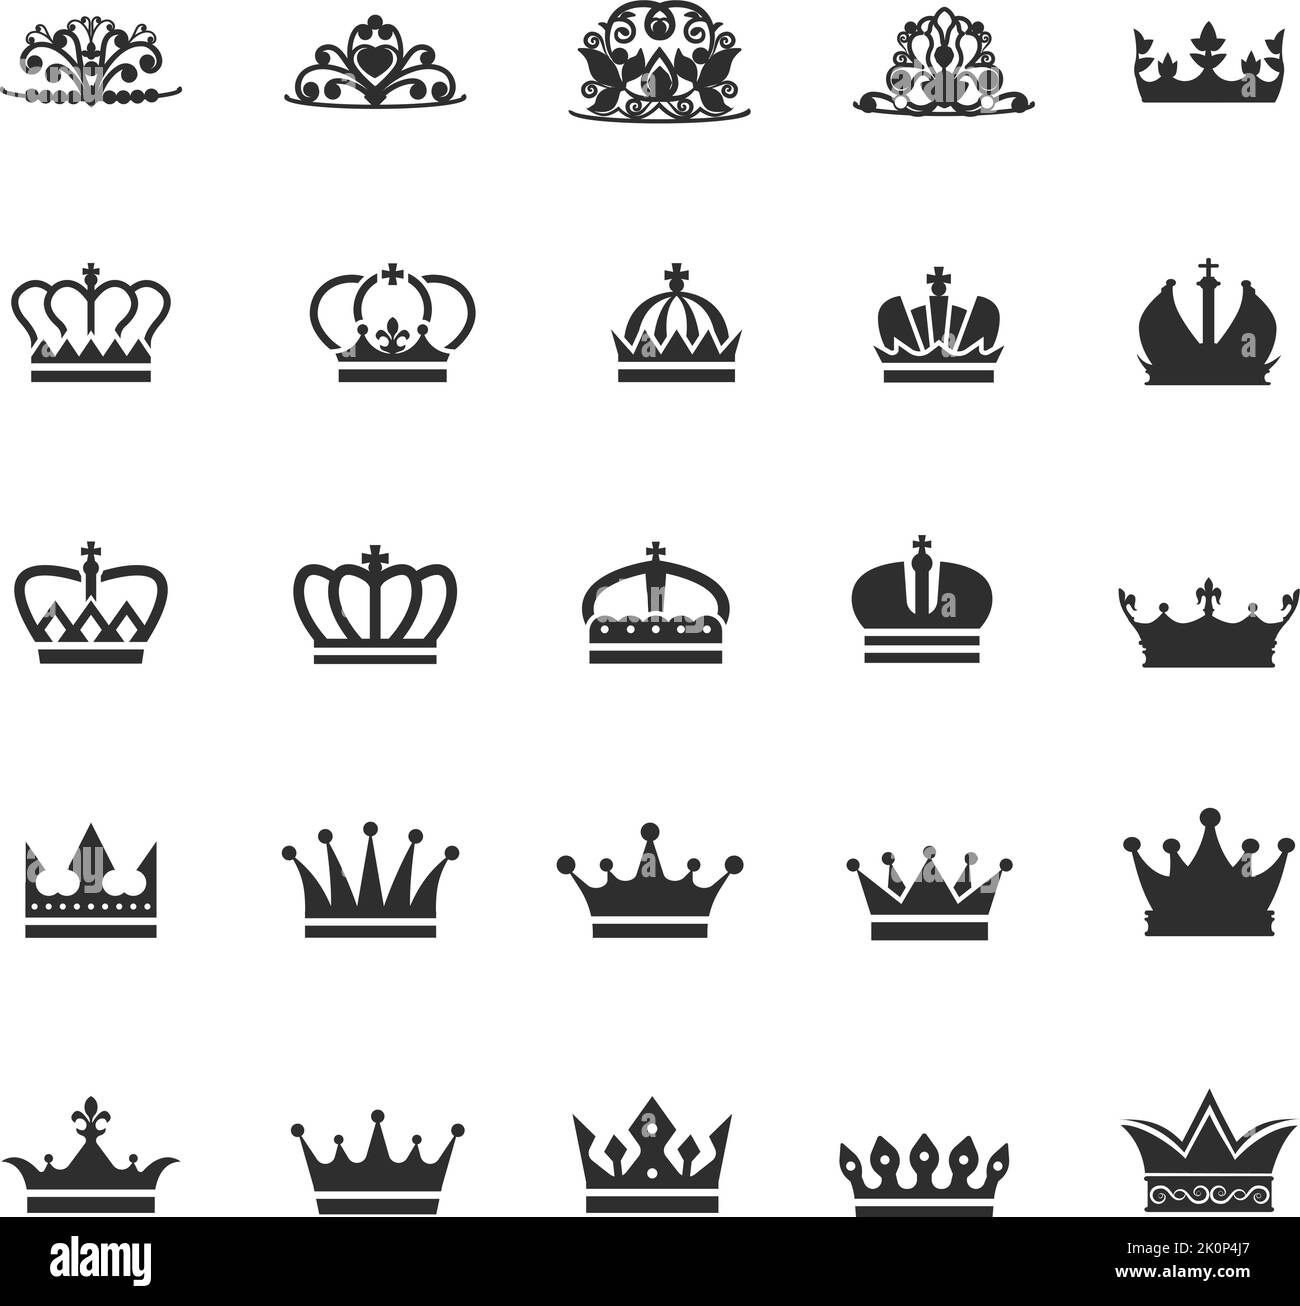 Princes crowns. King queen princess and prince crown icons, heraldic vector drawings royalty power signs Stock Vector